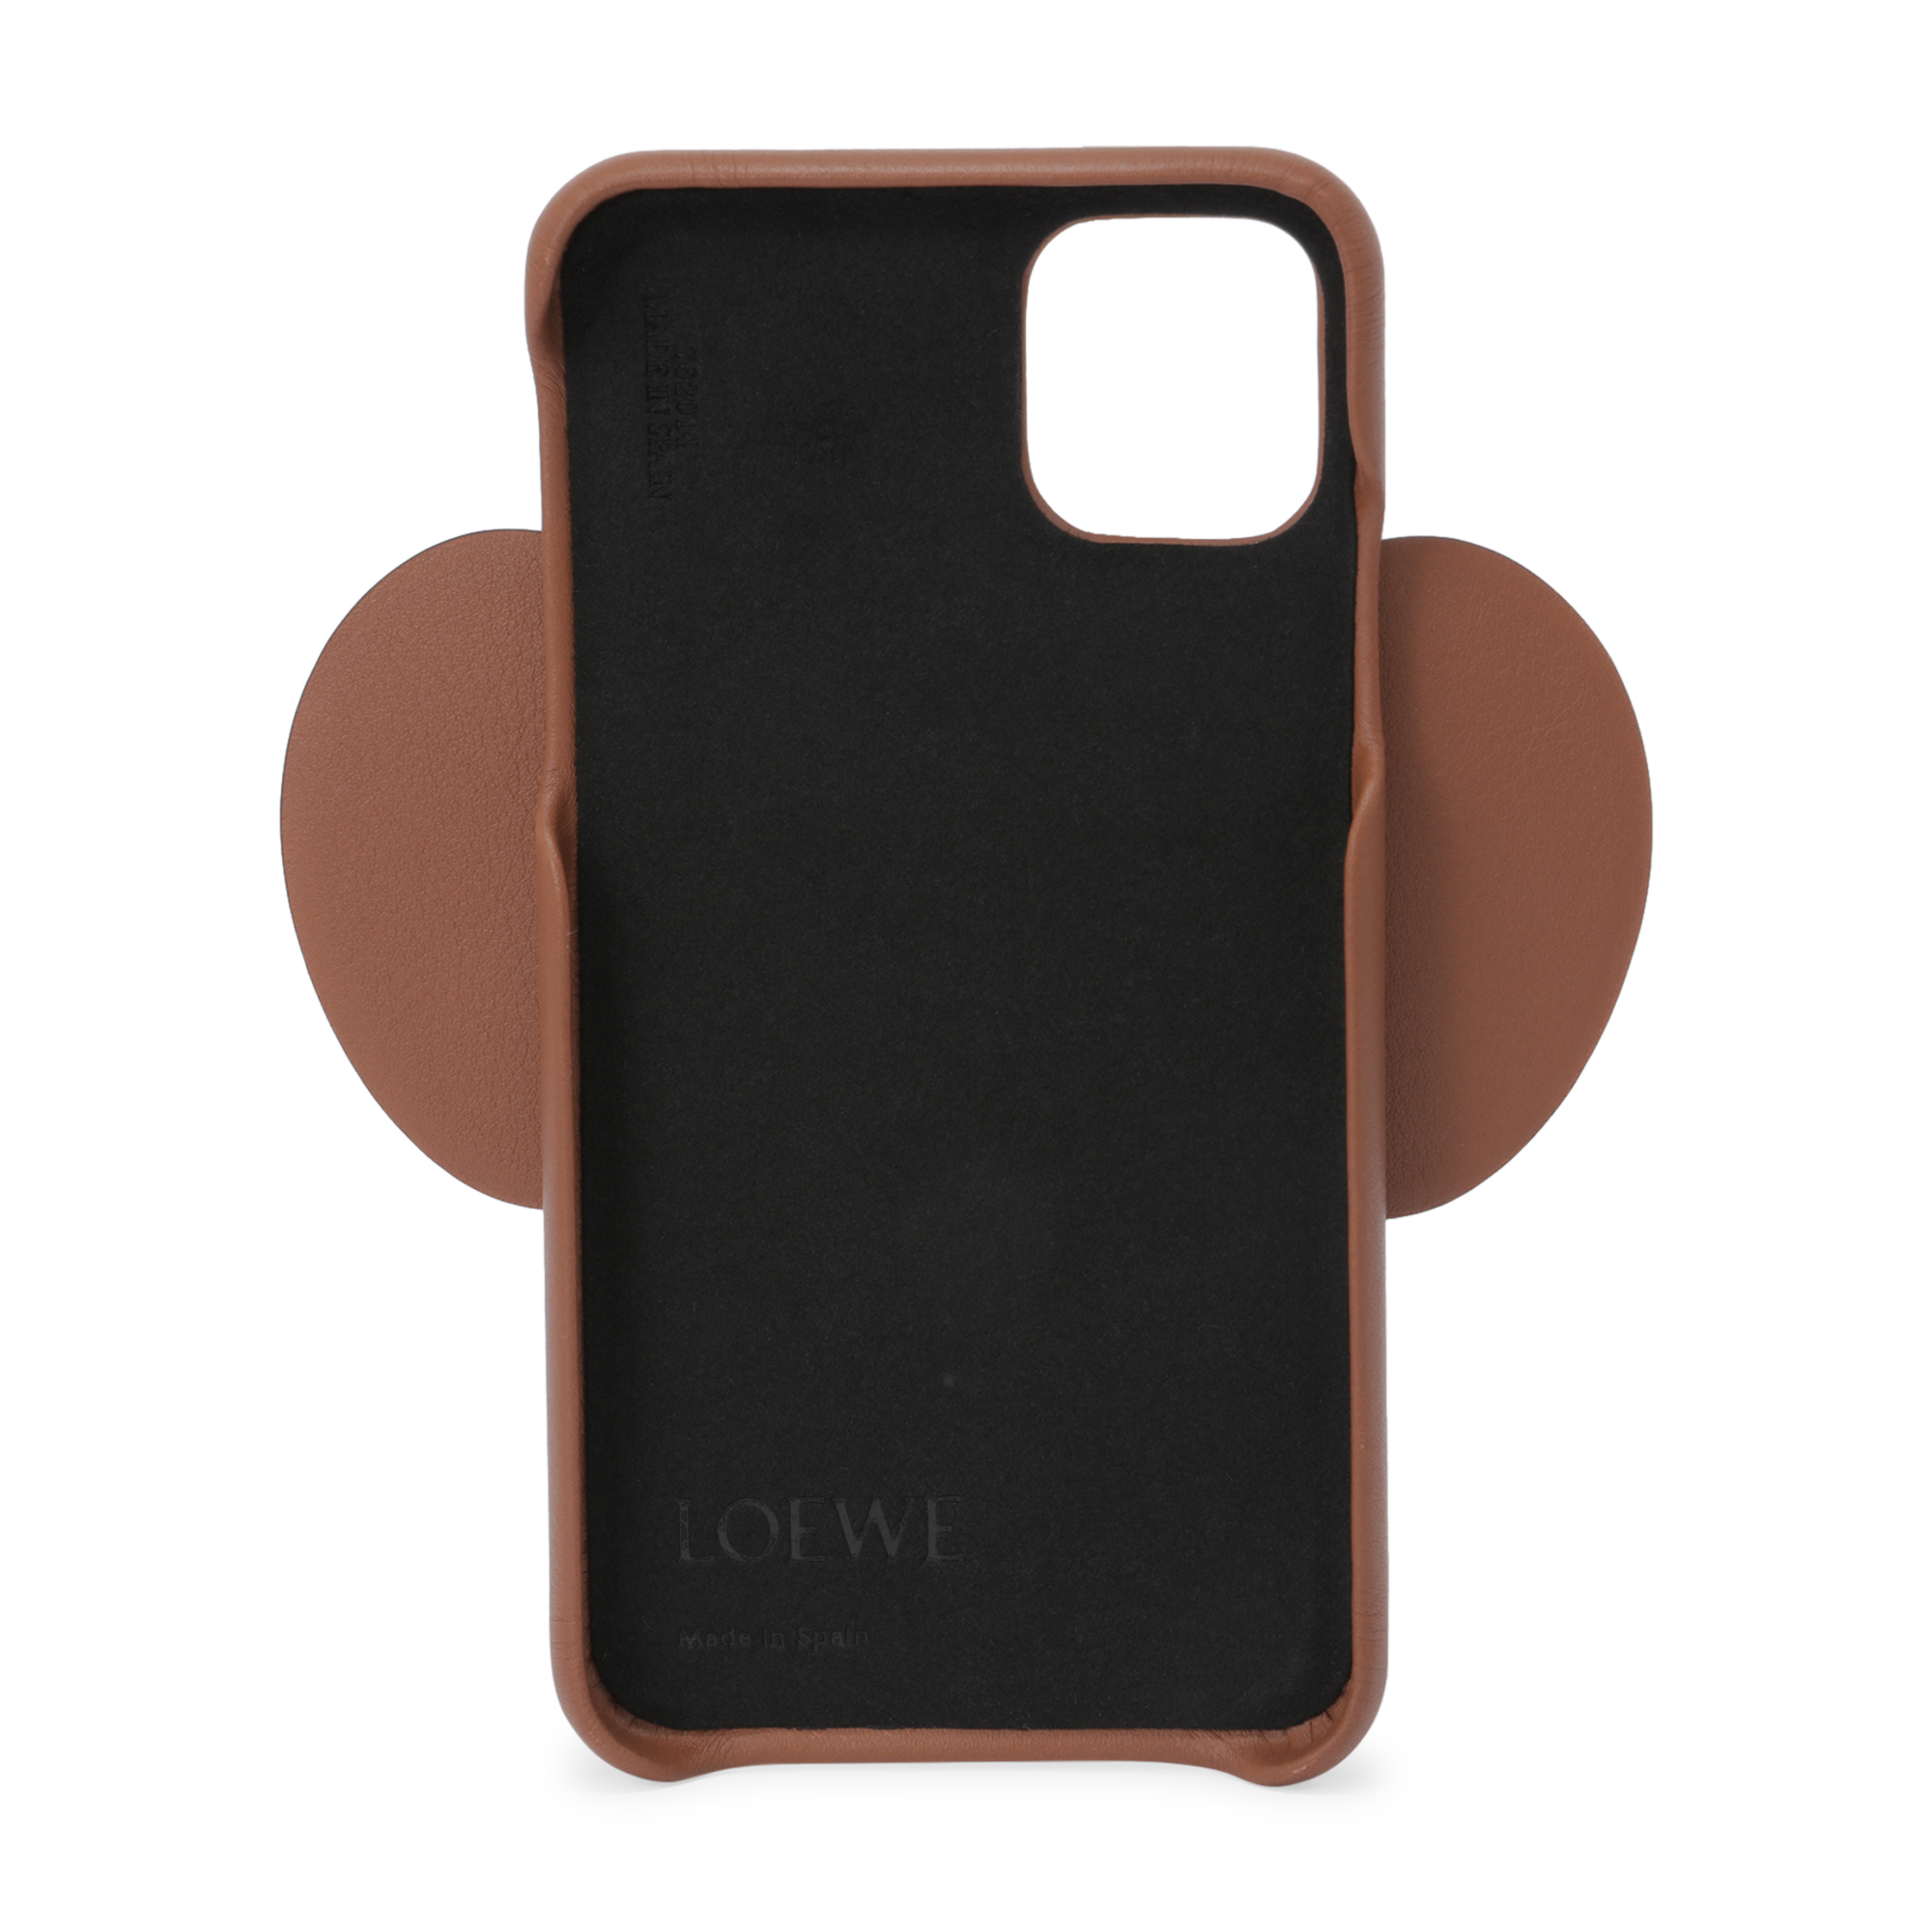 Loewe Elephant iPhone 11 Pro Max cover for Men - Brown in UAE